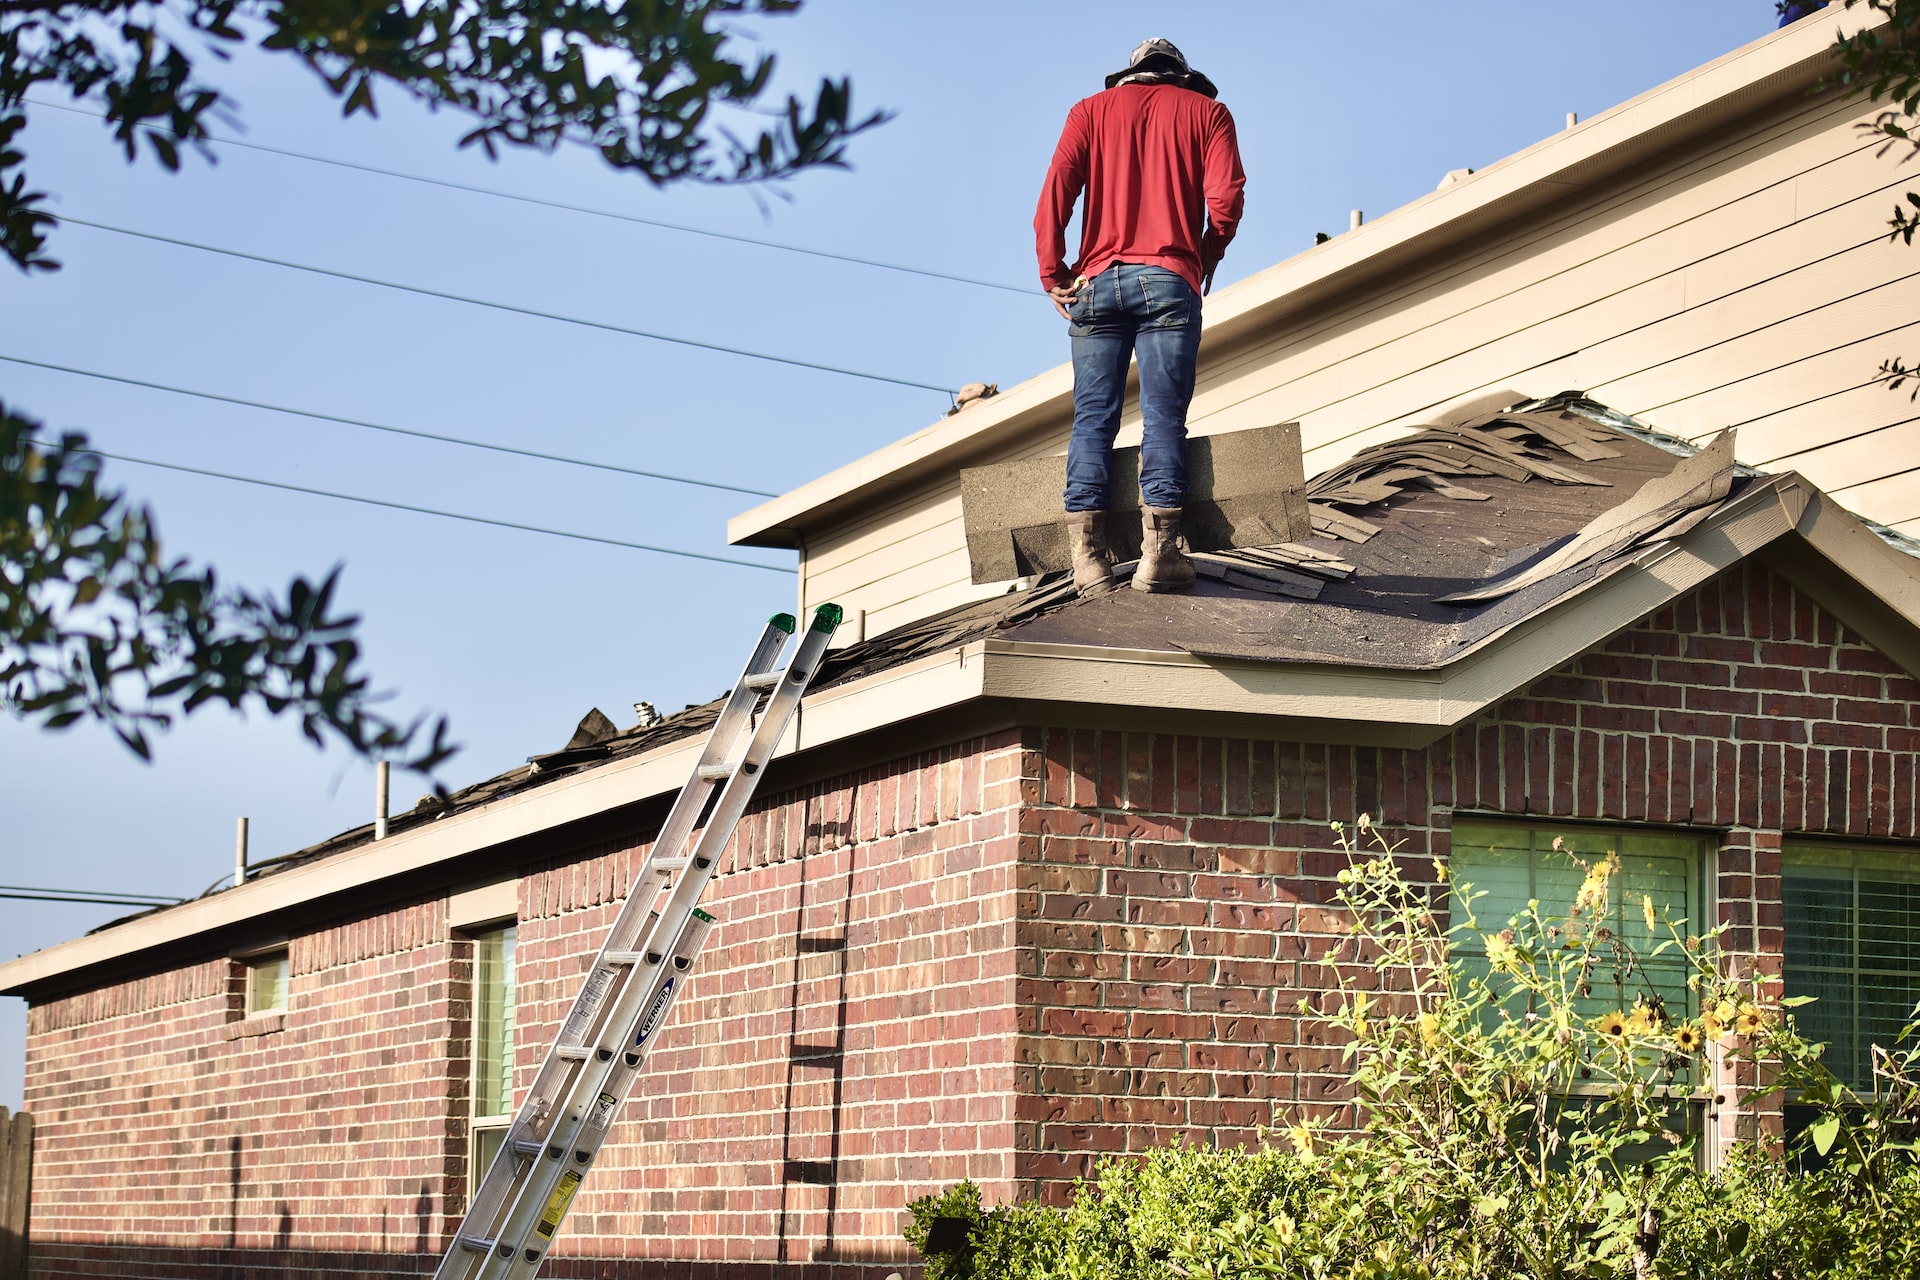 When Do You Need Emergency Roof Repair?